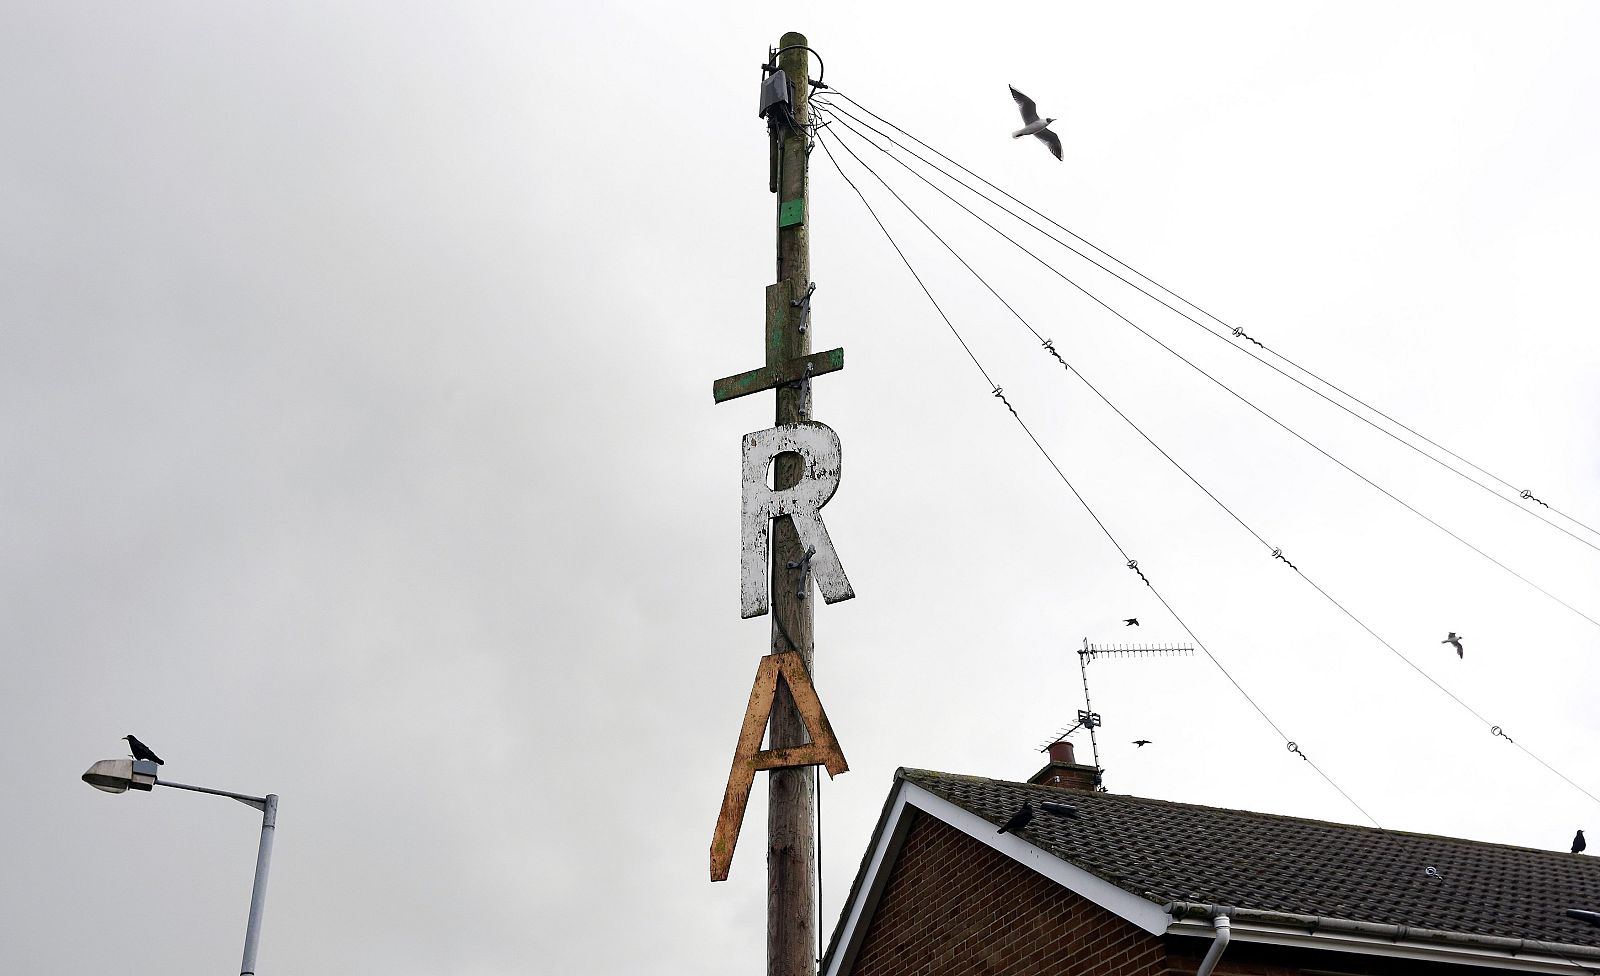 An Irish Republican Army (IRA) sign is seen nailed to a telegraph pole in the Kilwilkie estate, near Lurgan in Northern Ireland